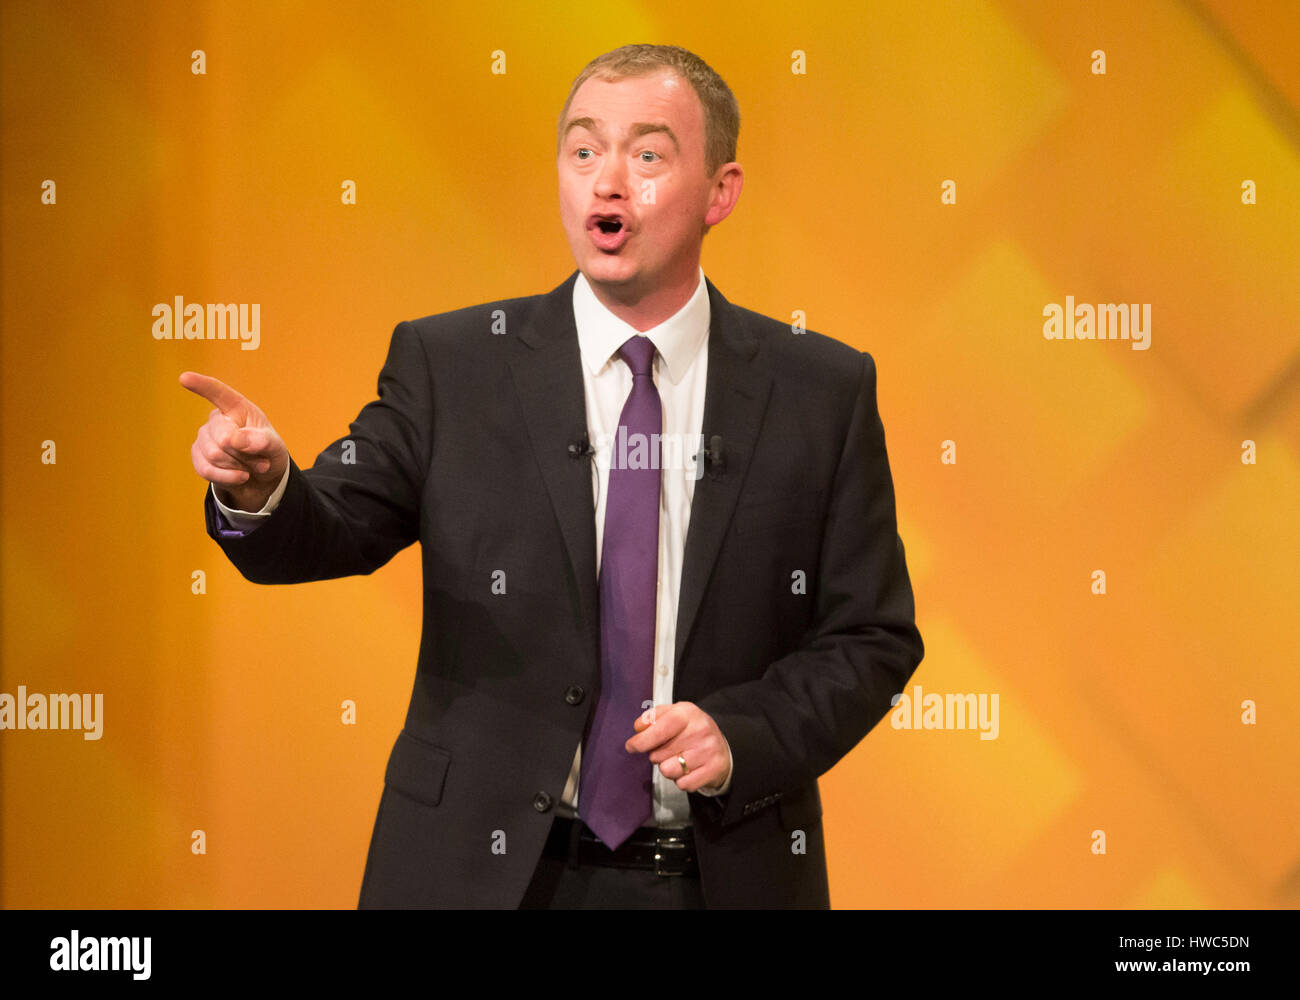 Leader of the Liberal Democrats Tim Farron during his keynote speech where he accused Theresa May of pursuing the same aggressive nationalistic agenda as Donald Trump and Vladimir Putin, during the Liberal Democrat spring conference at the Barbican Centre in York. Stock Photo